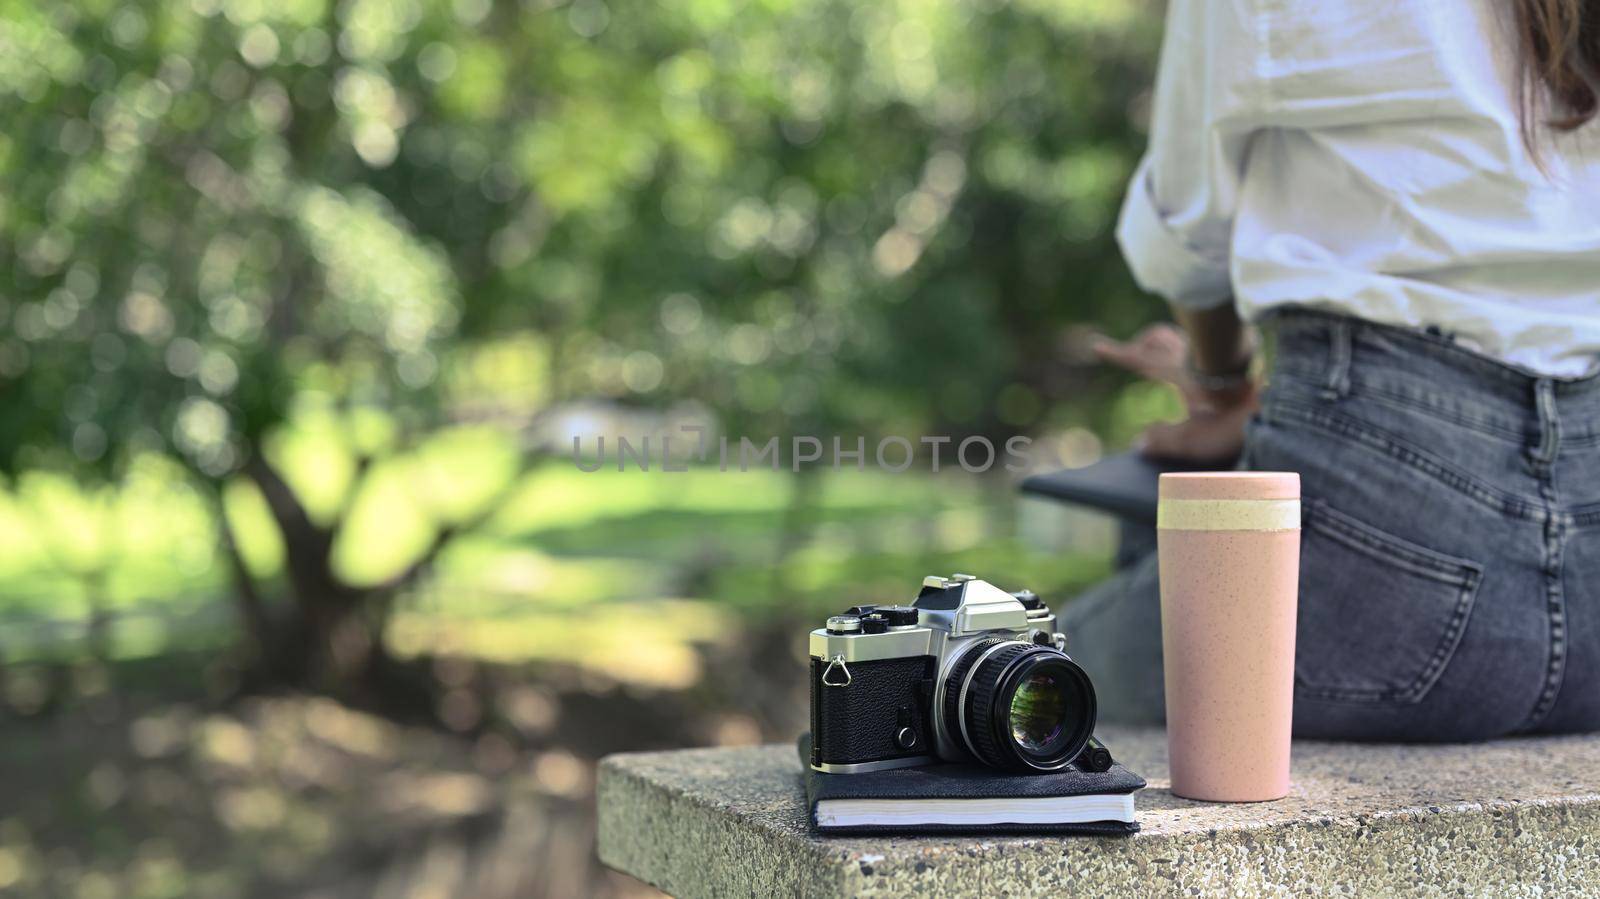 Retro camera, coffee cup and book on bench in nature park. by prathanchorruangsak